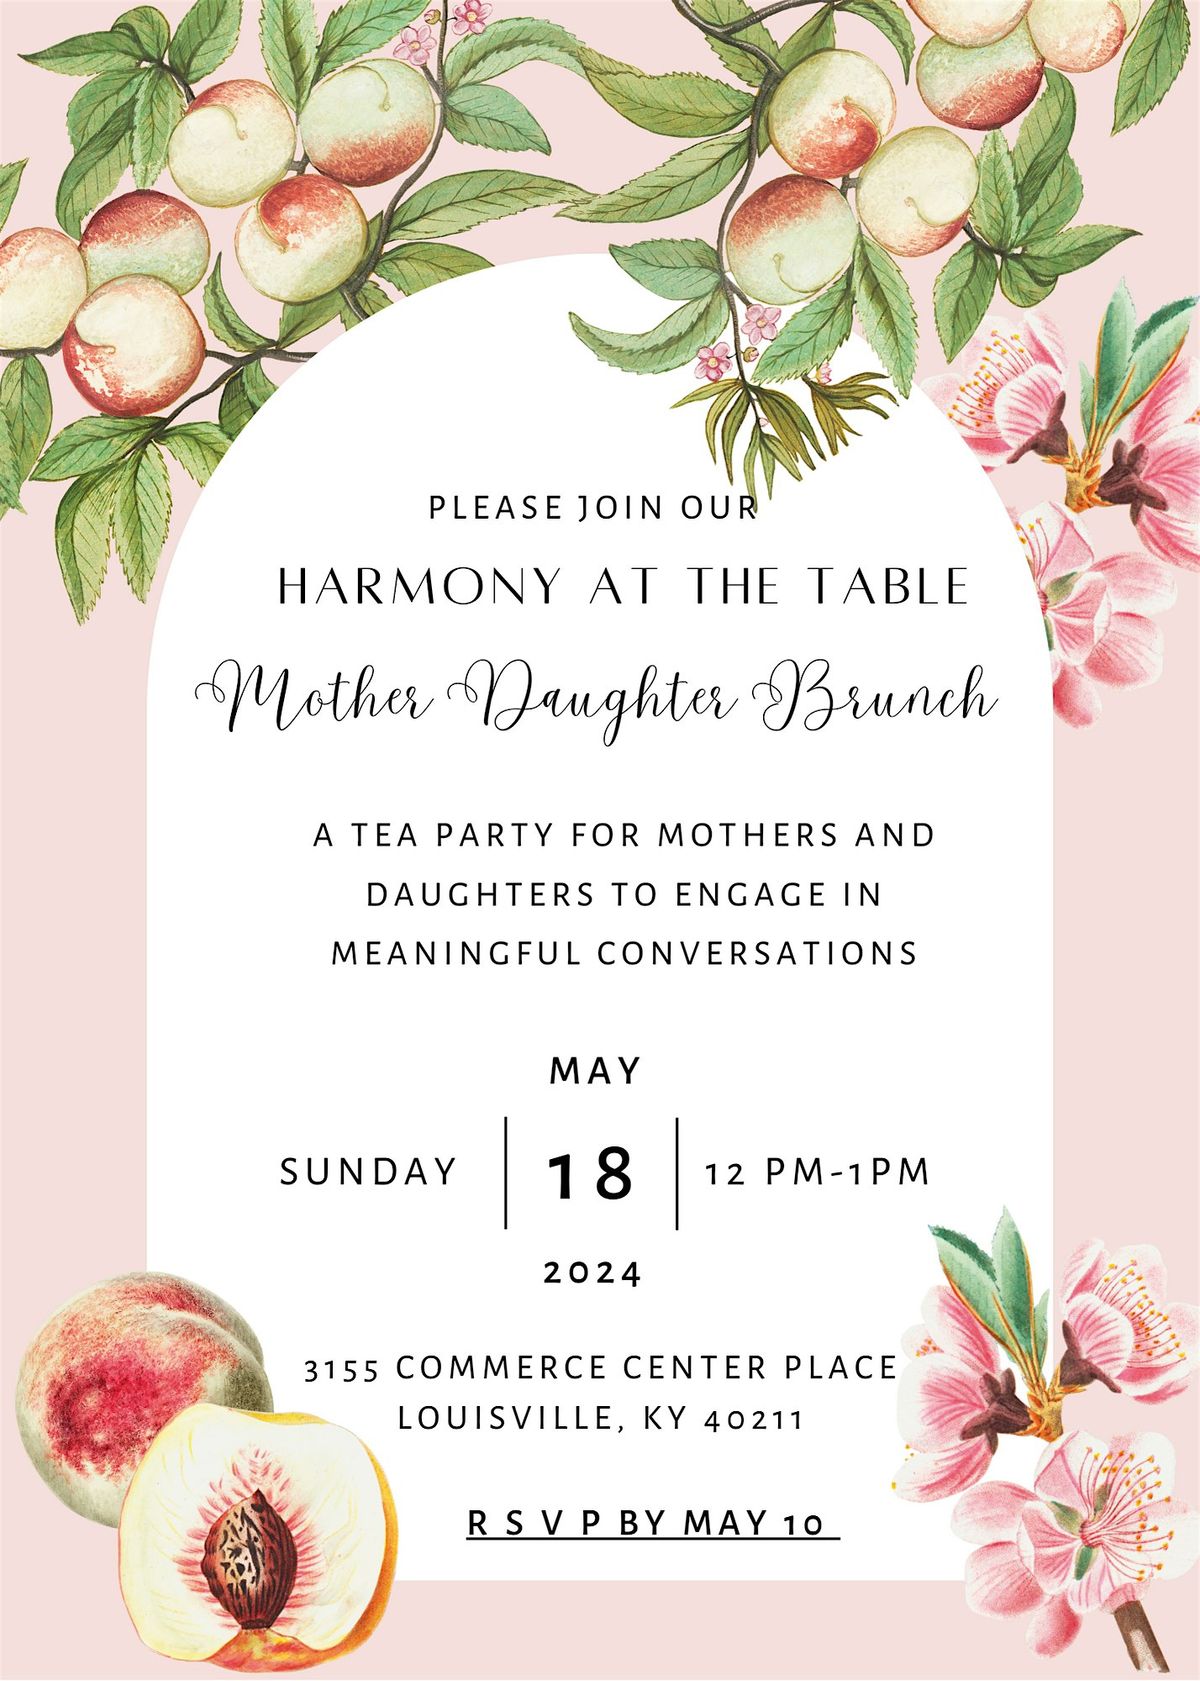 Harmony at the Table: Mother Daughter Brunch